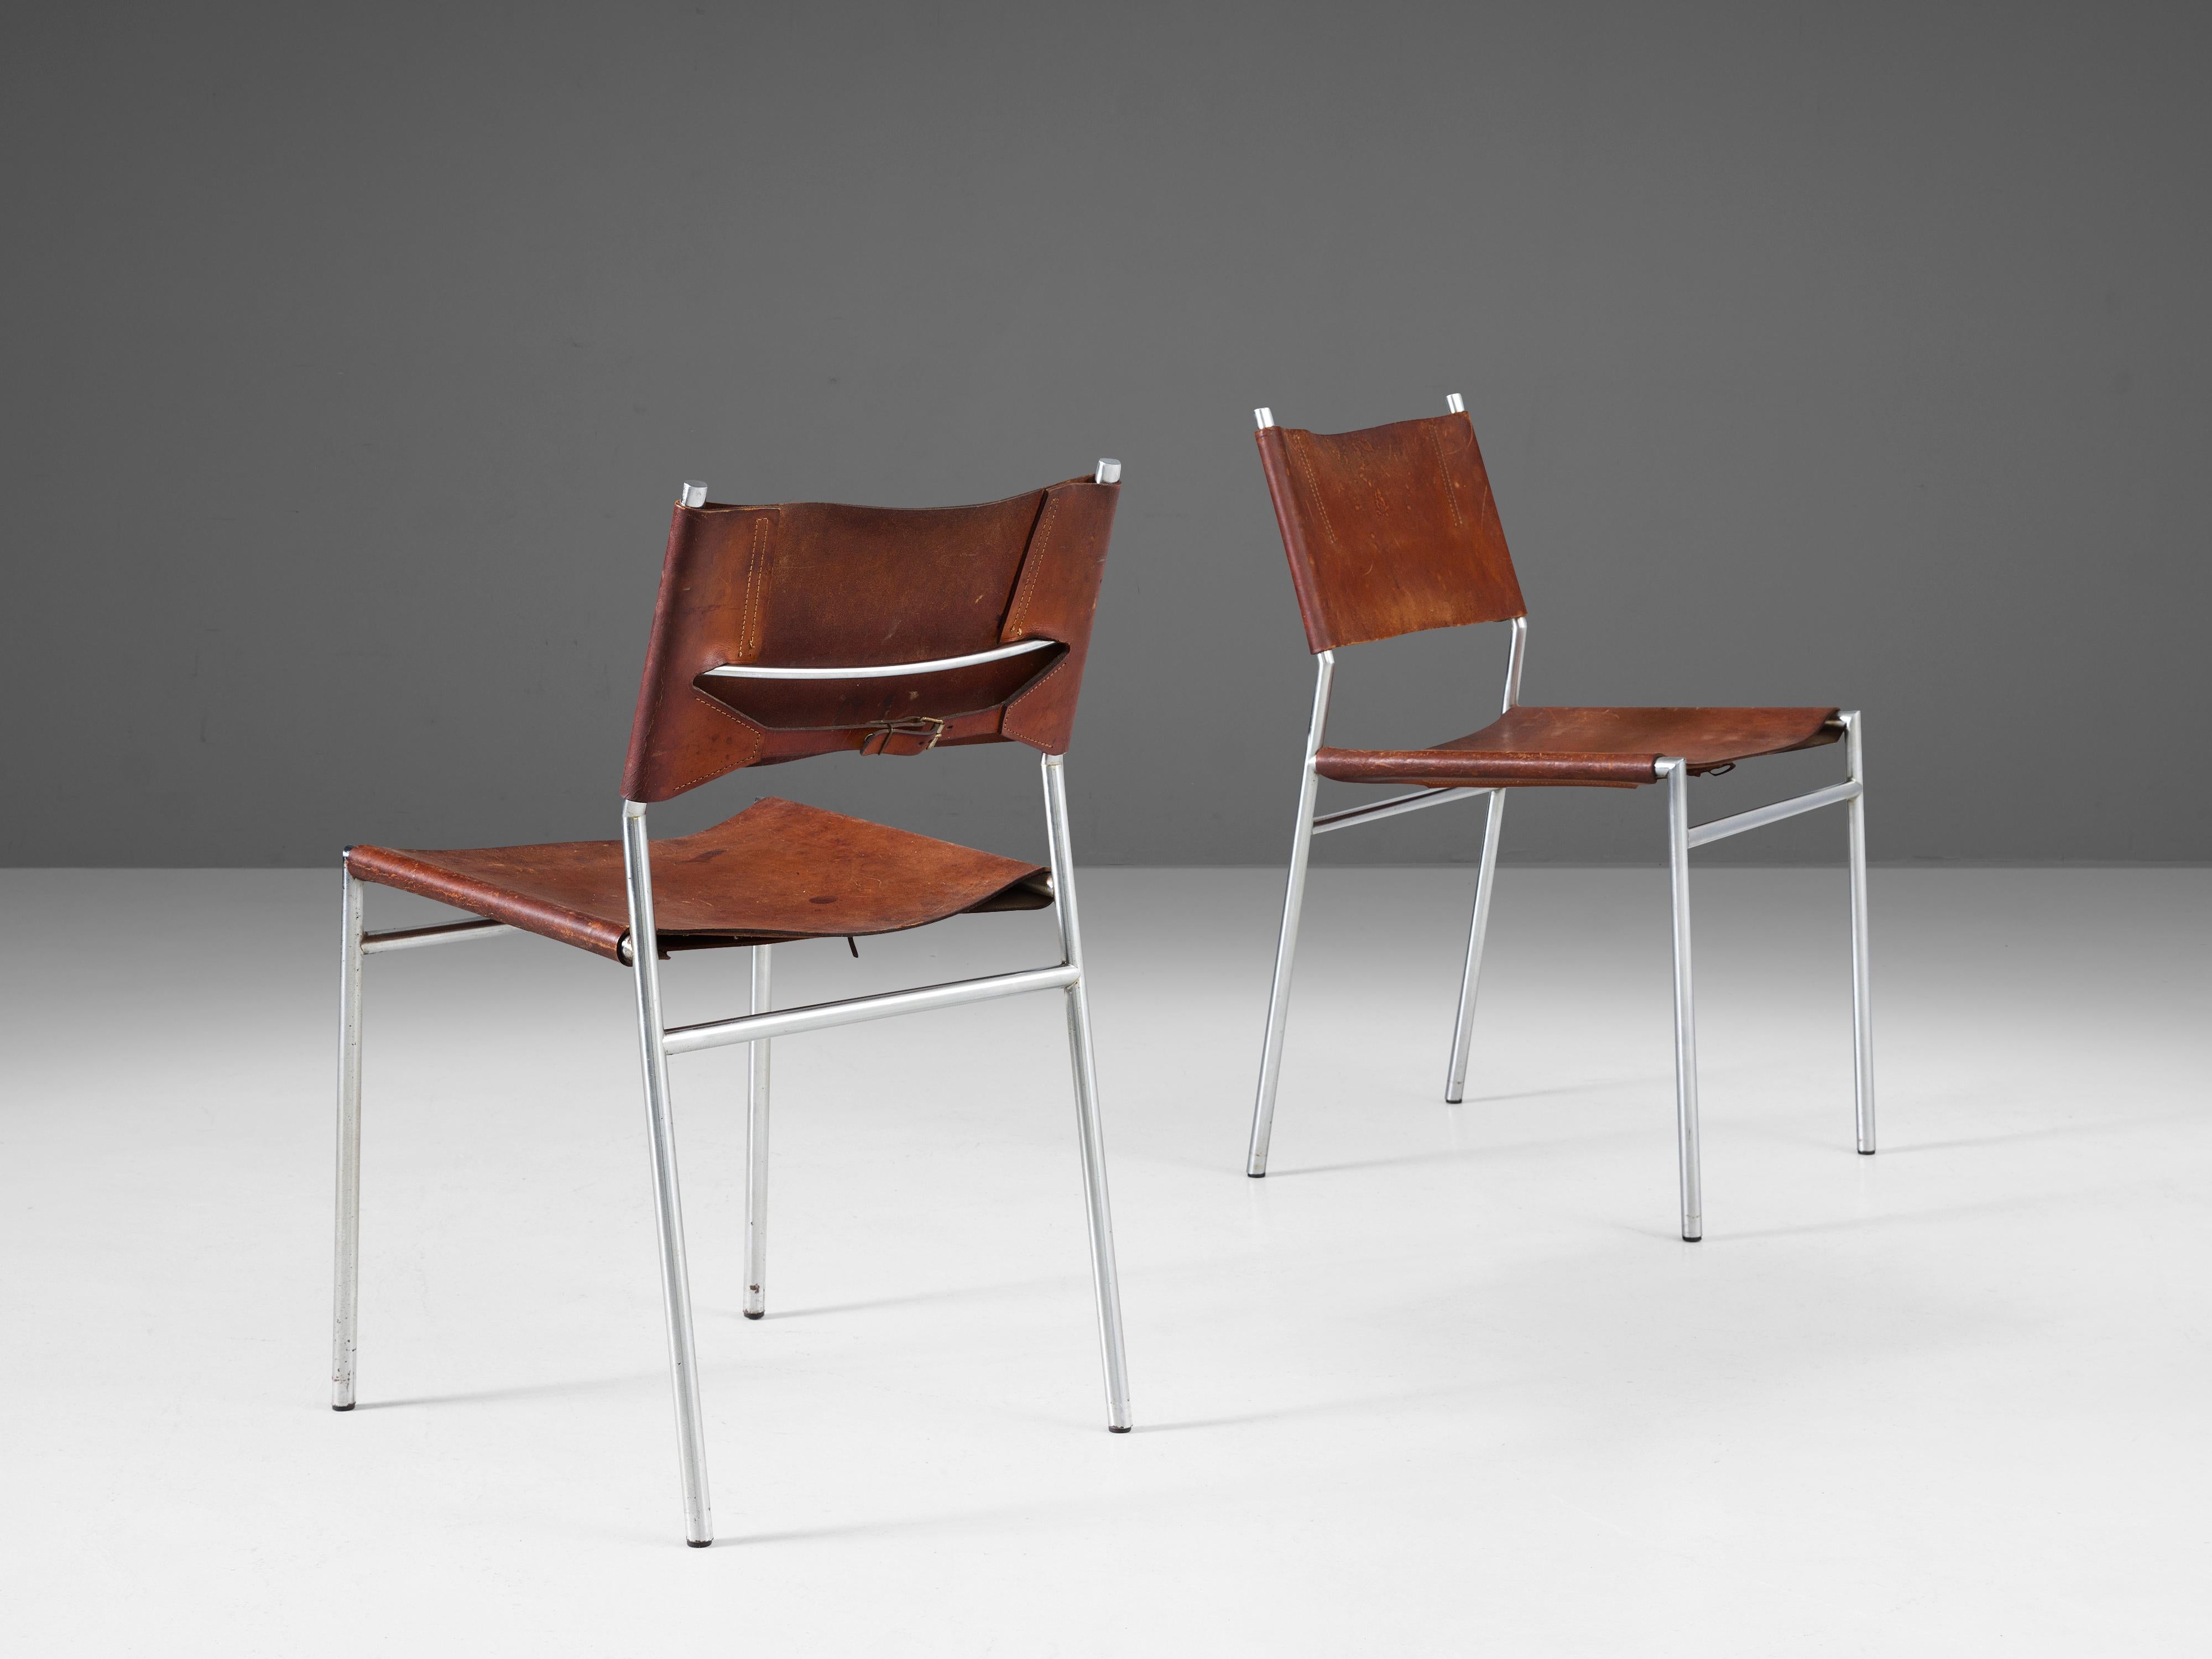 Mid-20th Century Martin Visser for 't Spectrum Pair of Dining Chairs in Cognac Leather